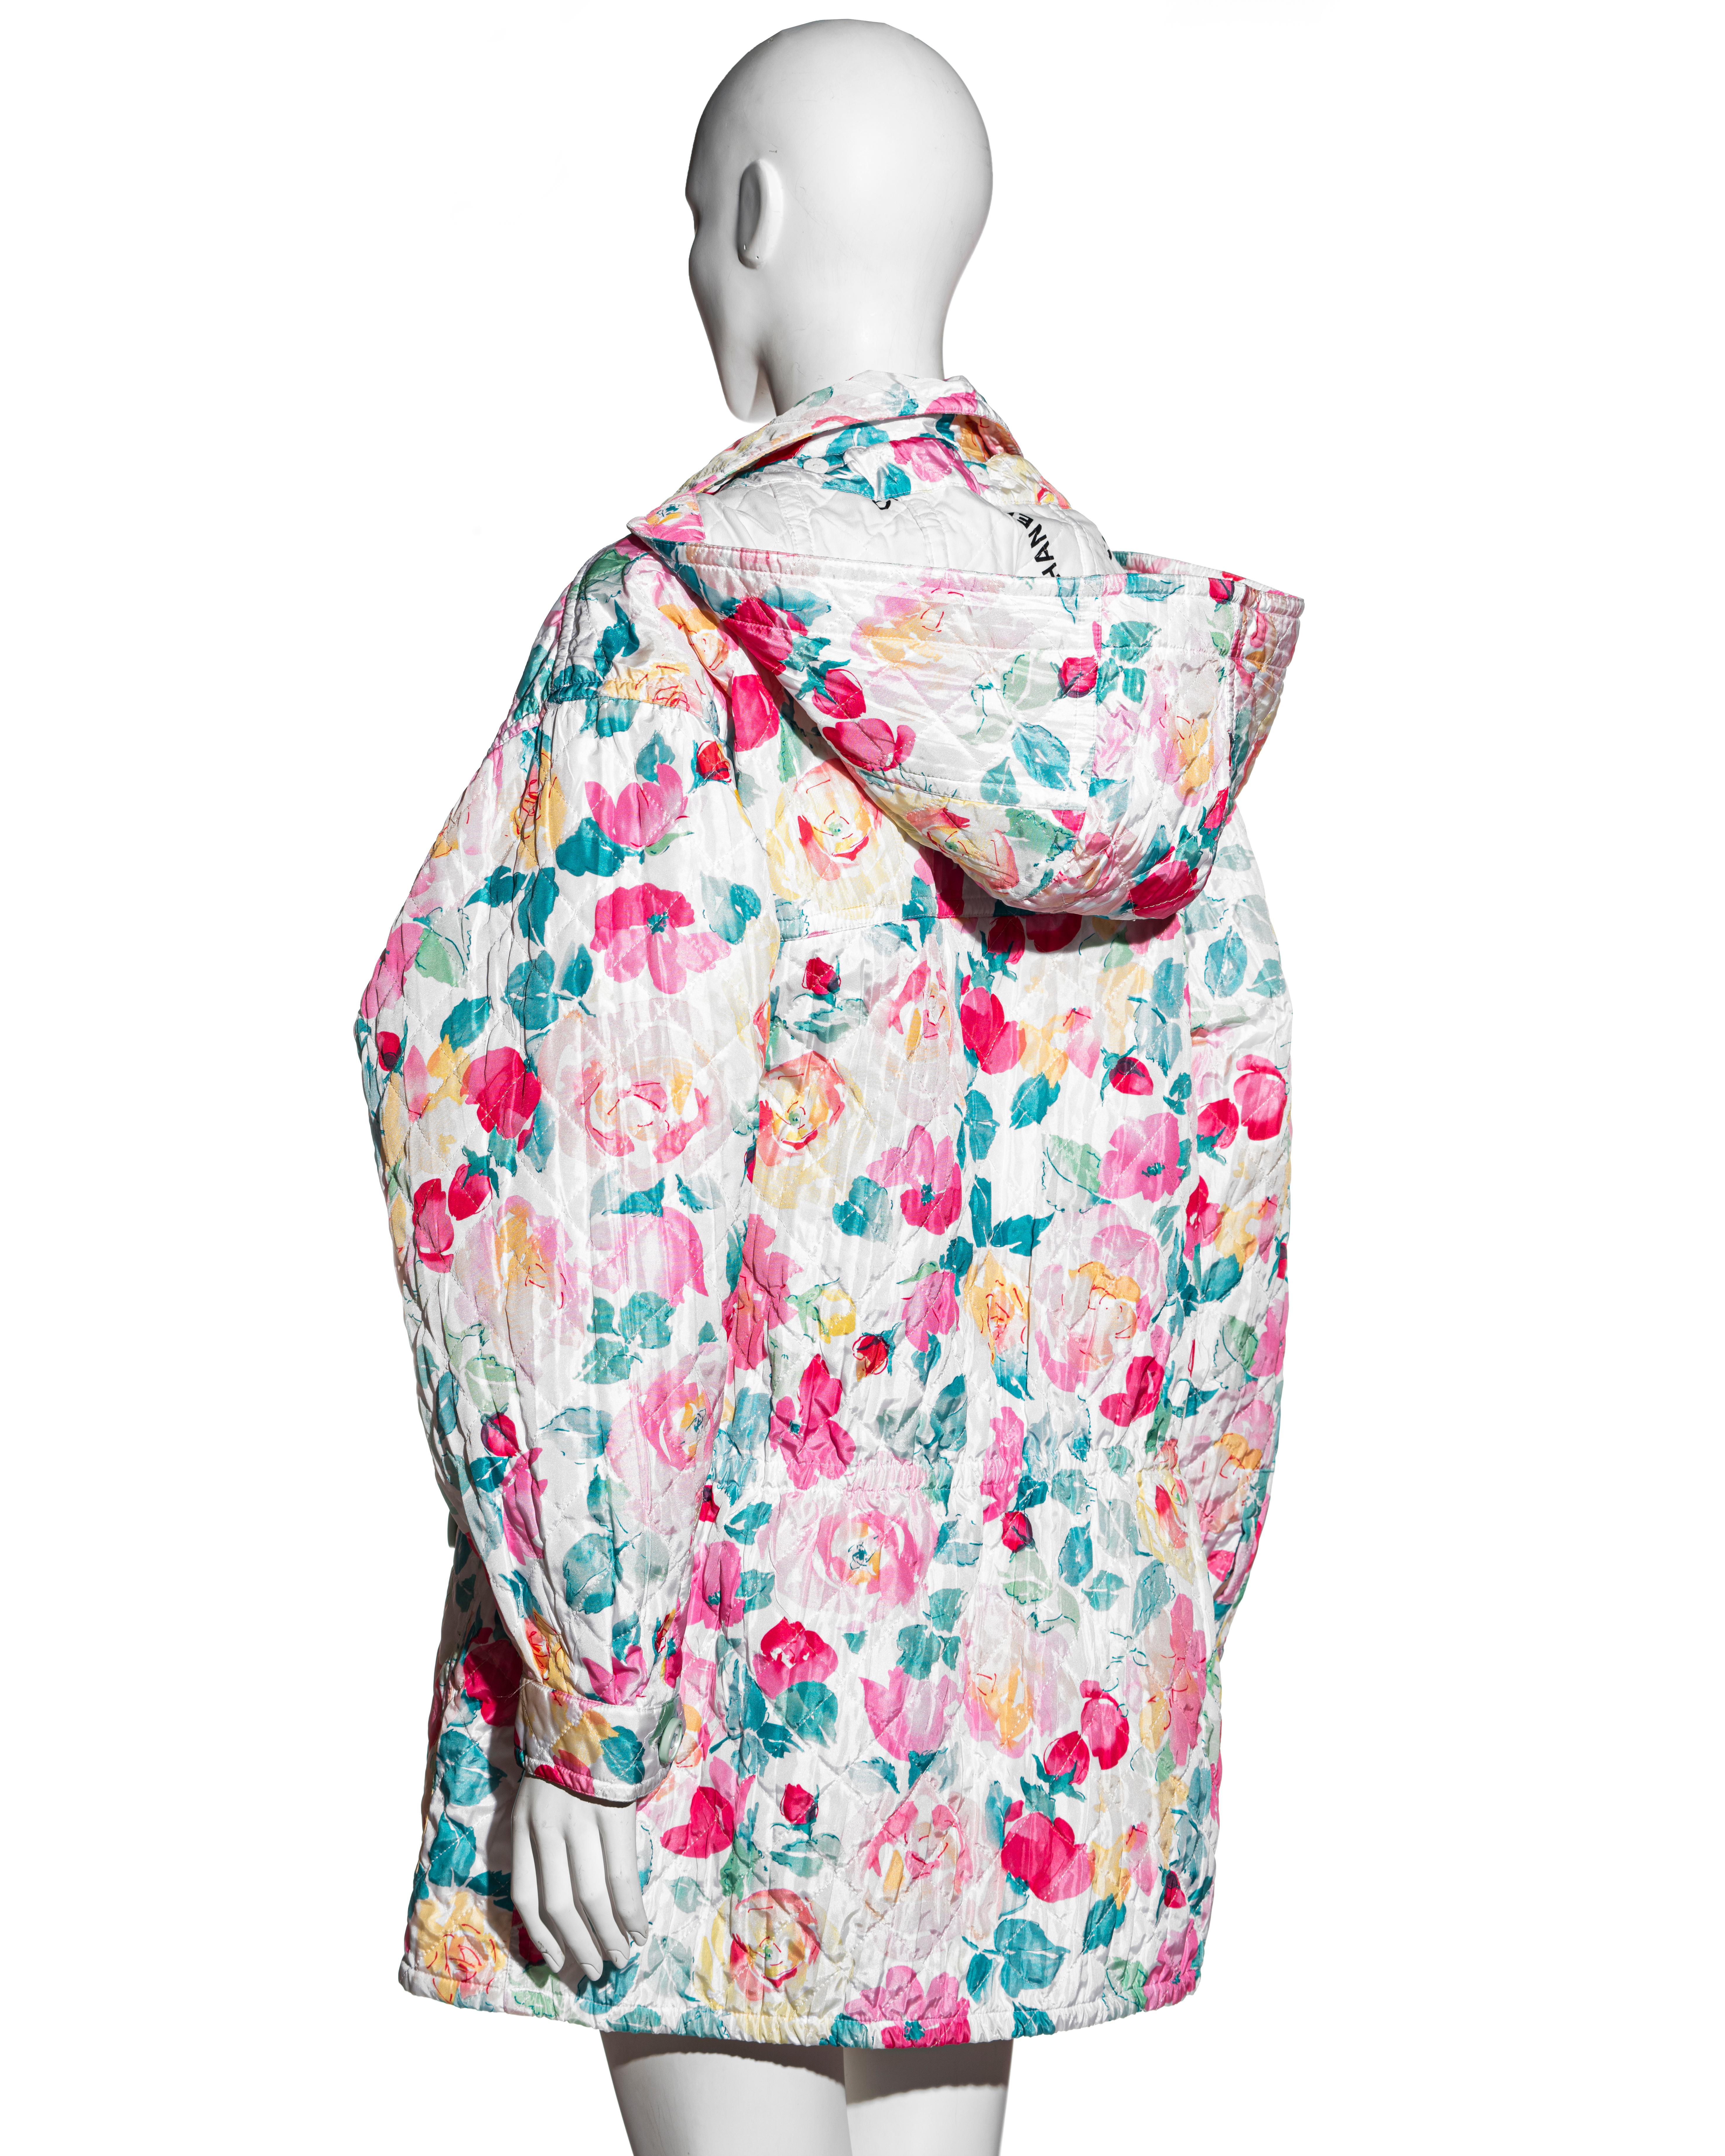 Chanel by Karl Lagerfeld pink rose print quilted playsuit and coat set, c 1994 For Sale 4